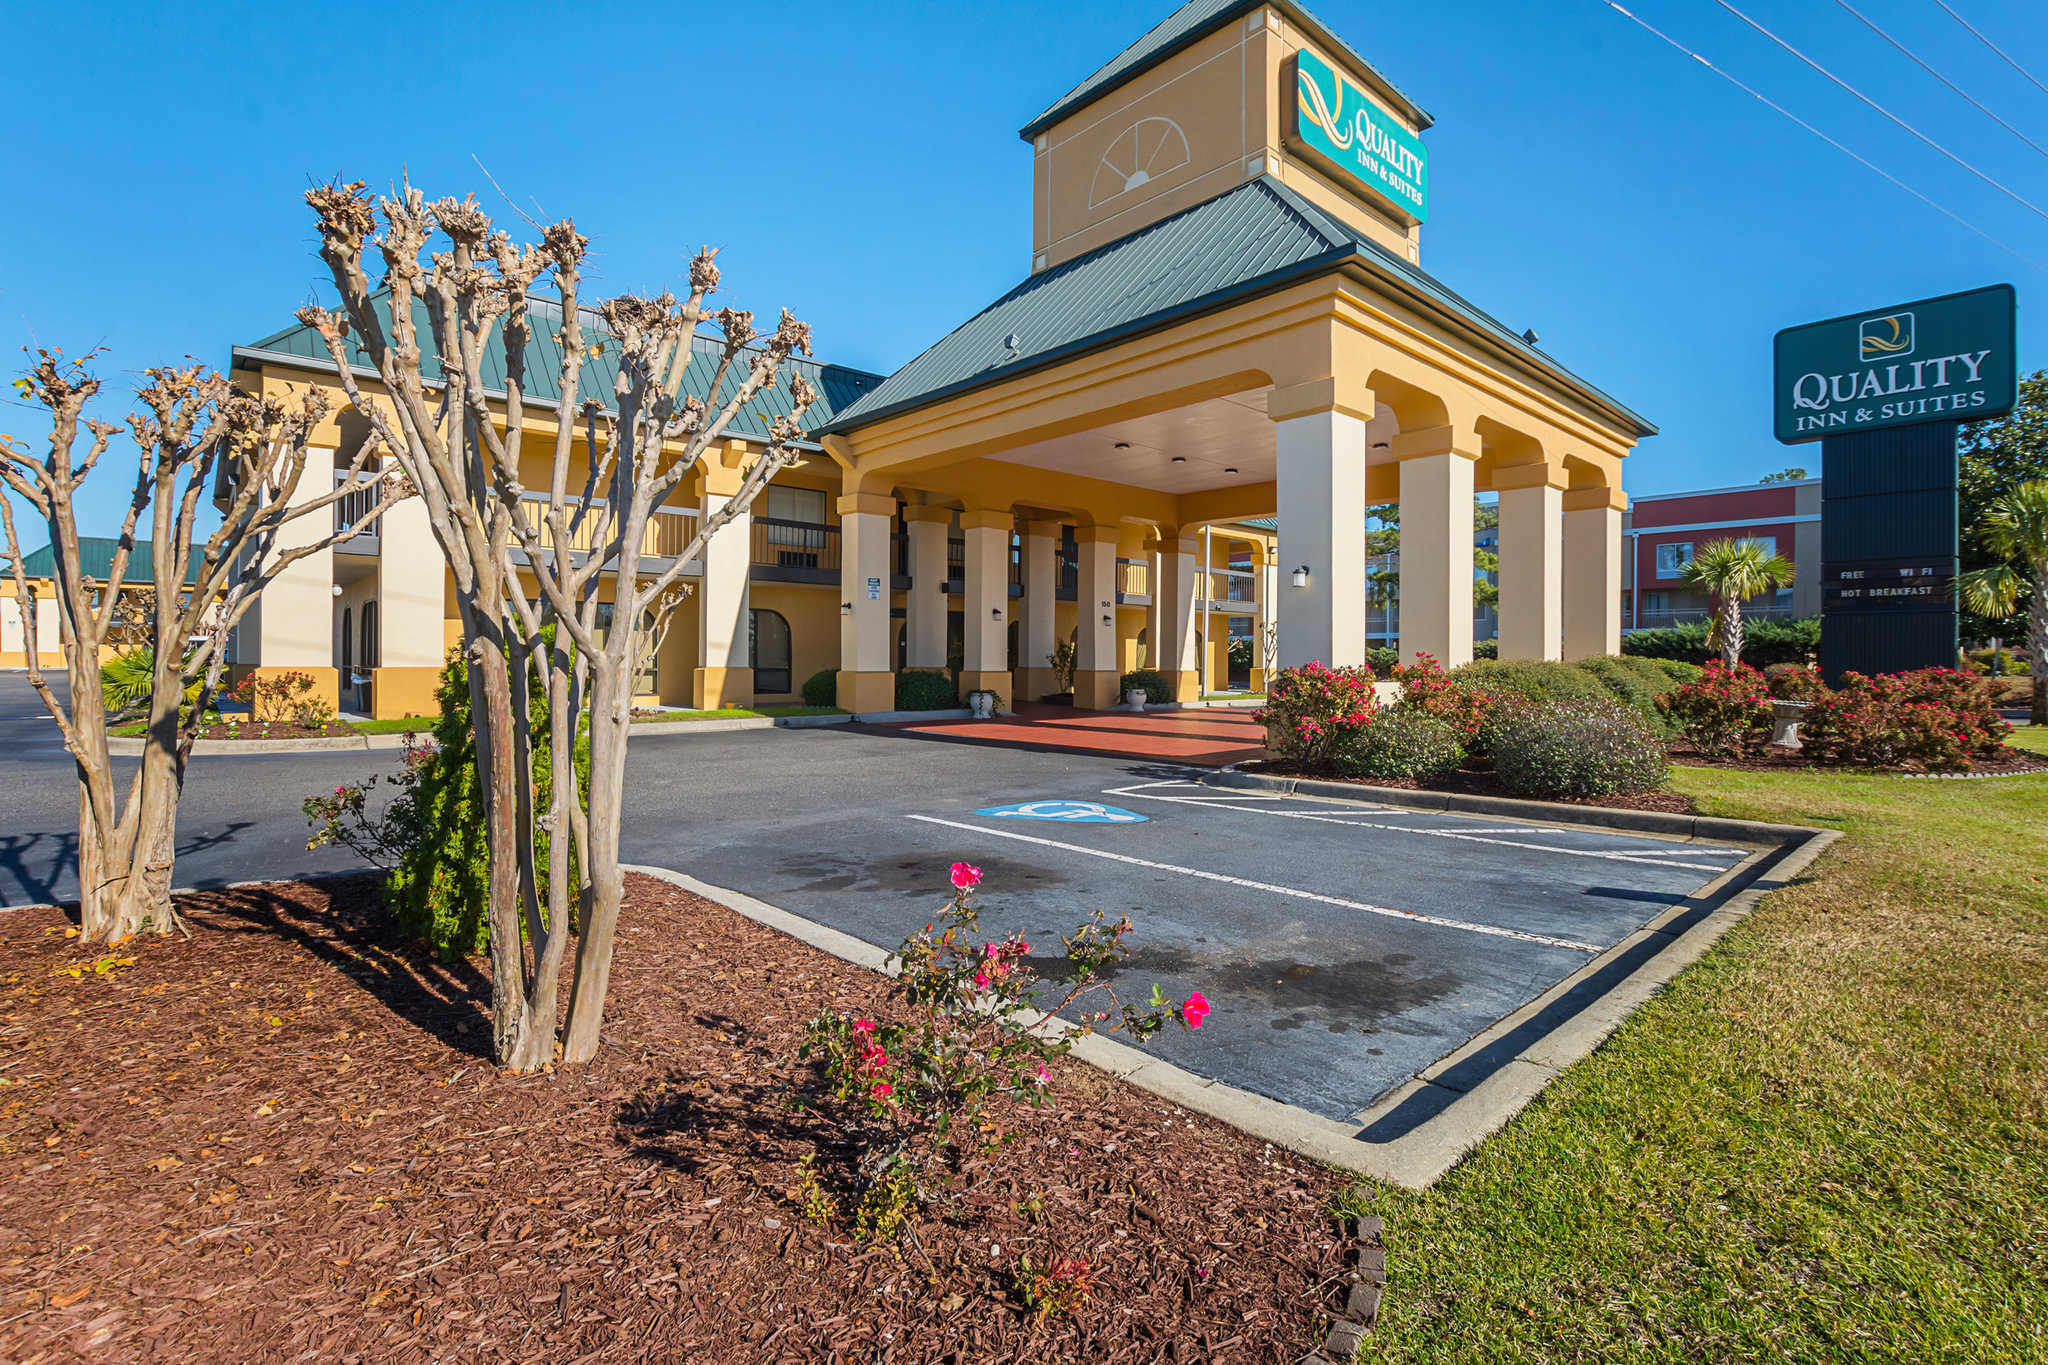 Quality Inn & Suites Civic Center Coupons Florence SC near me | 8coupons